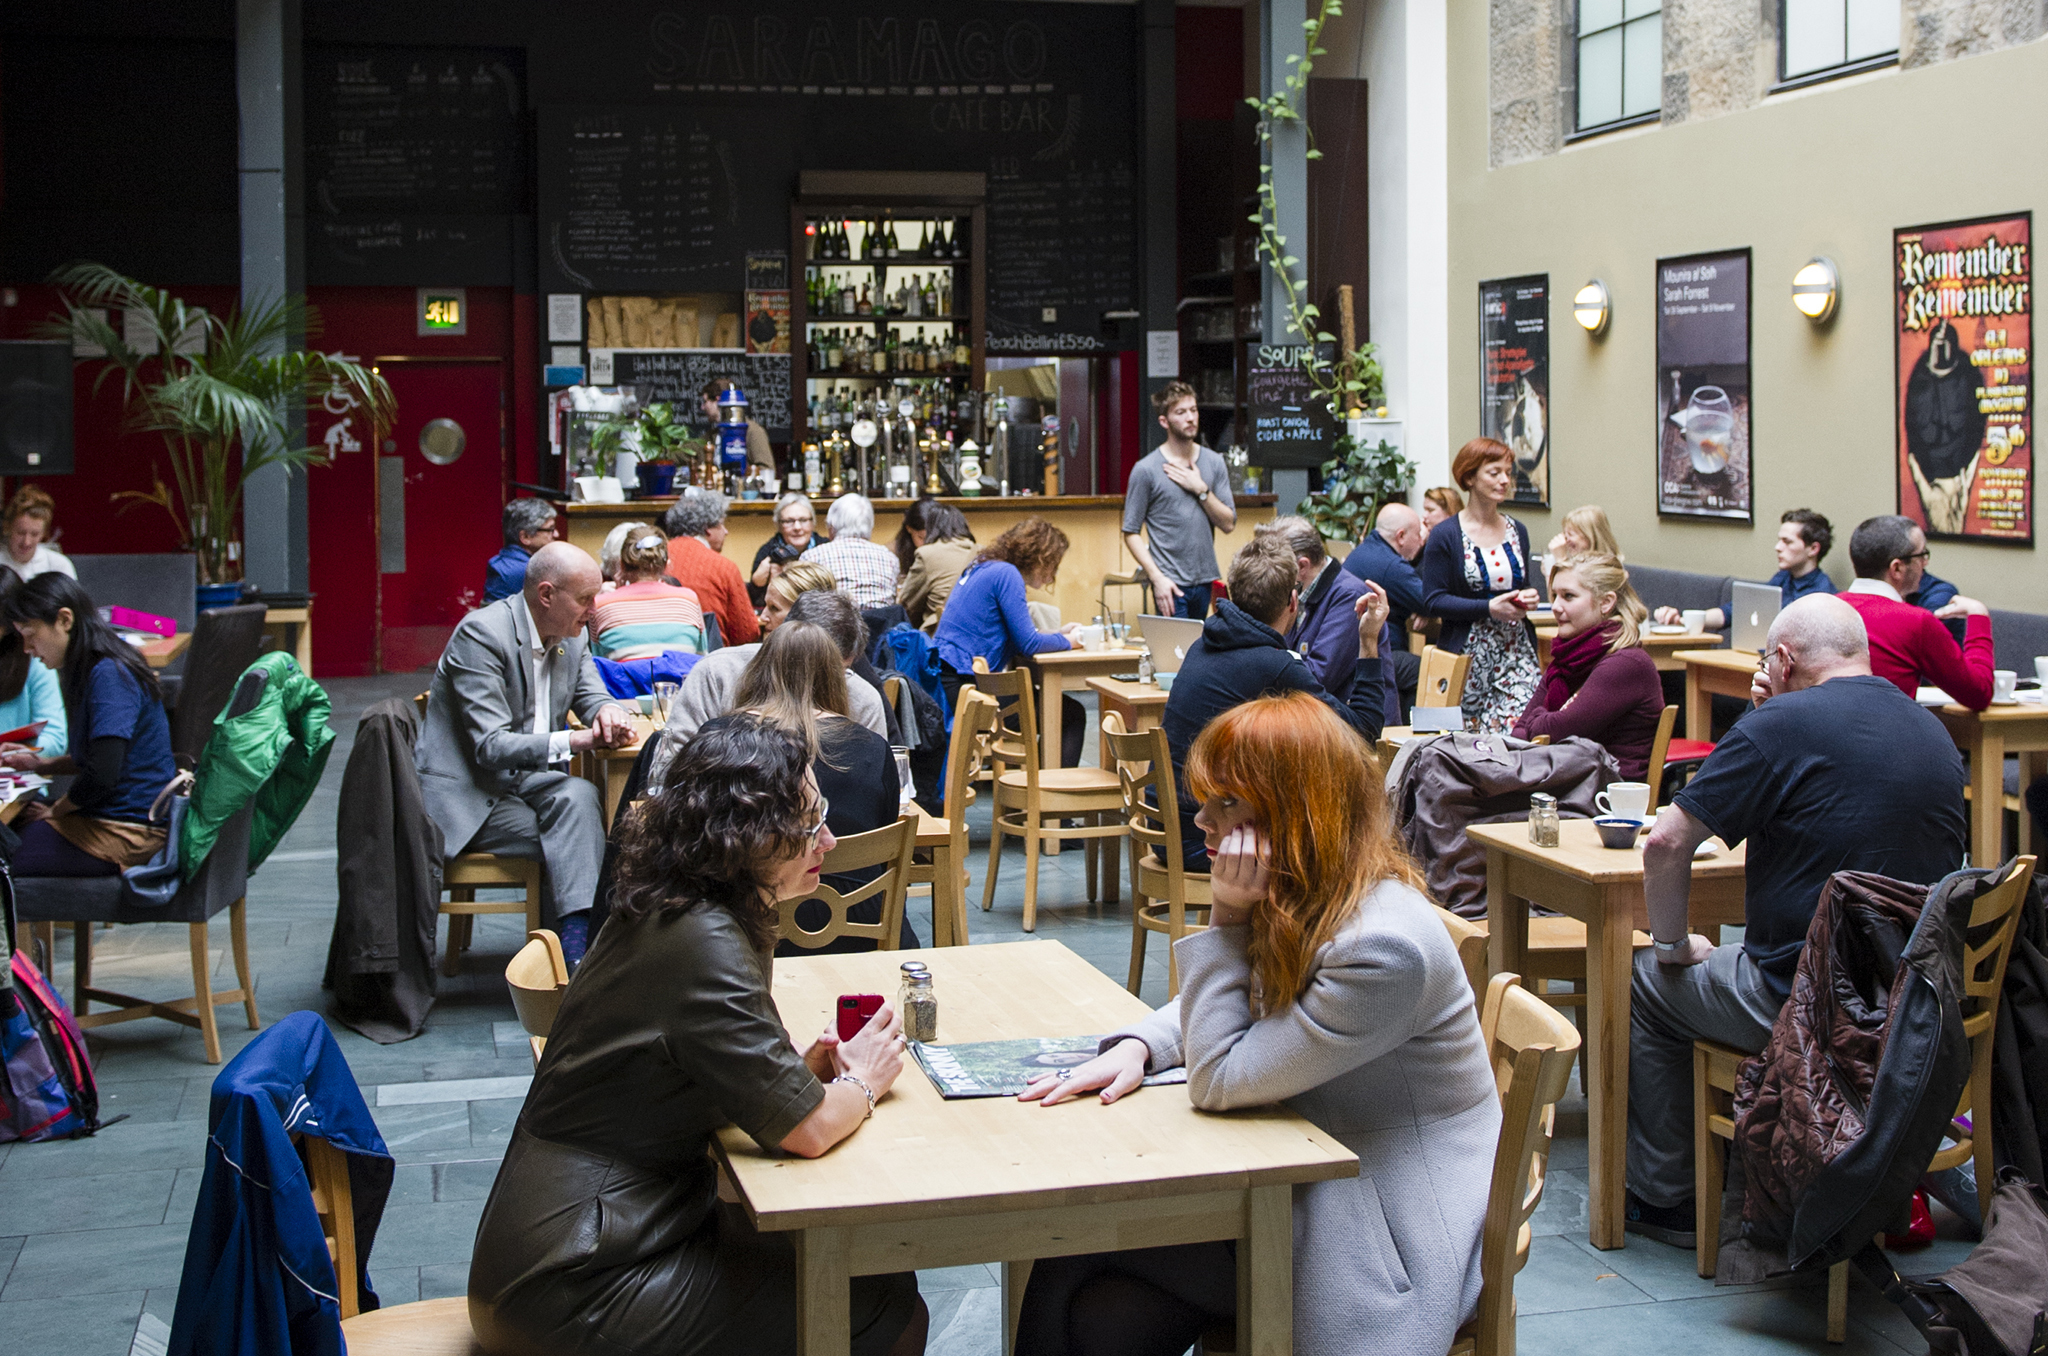 Glasgow's Best Coffee Shops and Cafes - Restaurants - Time Out Glasgow